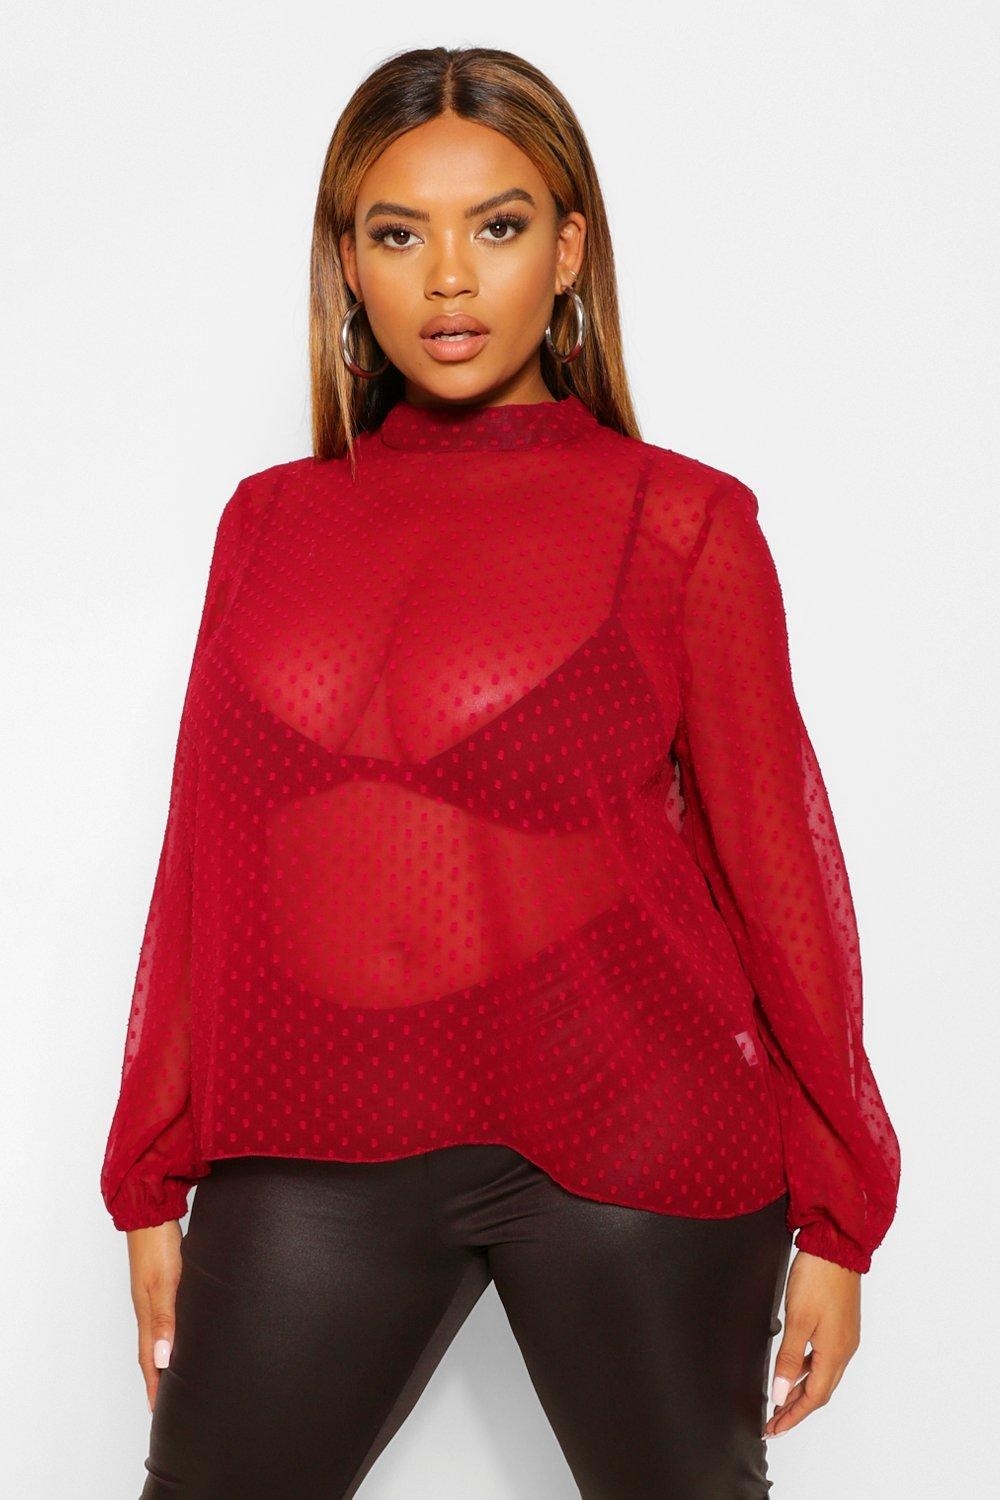 A model wearing the top in red